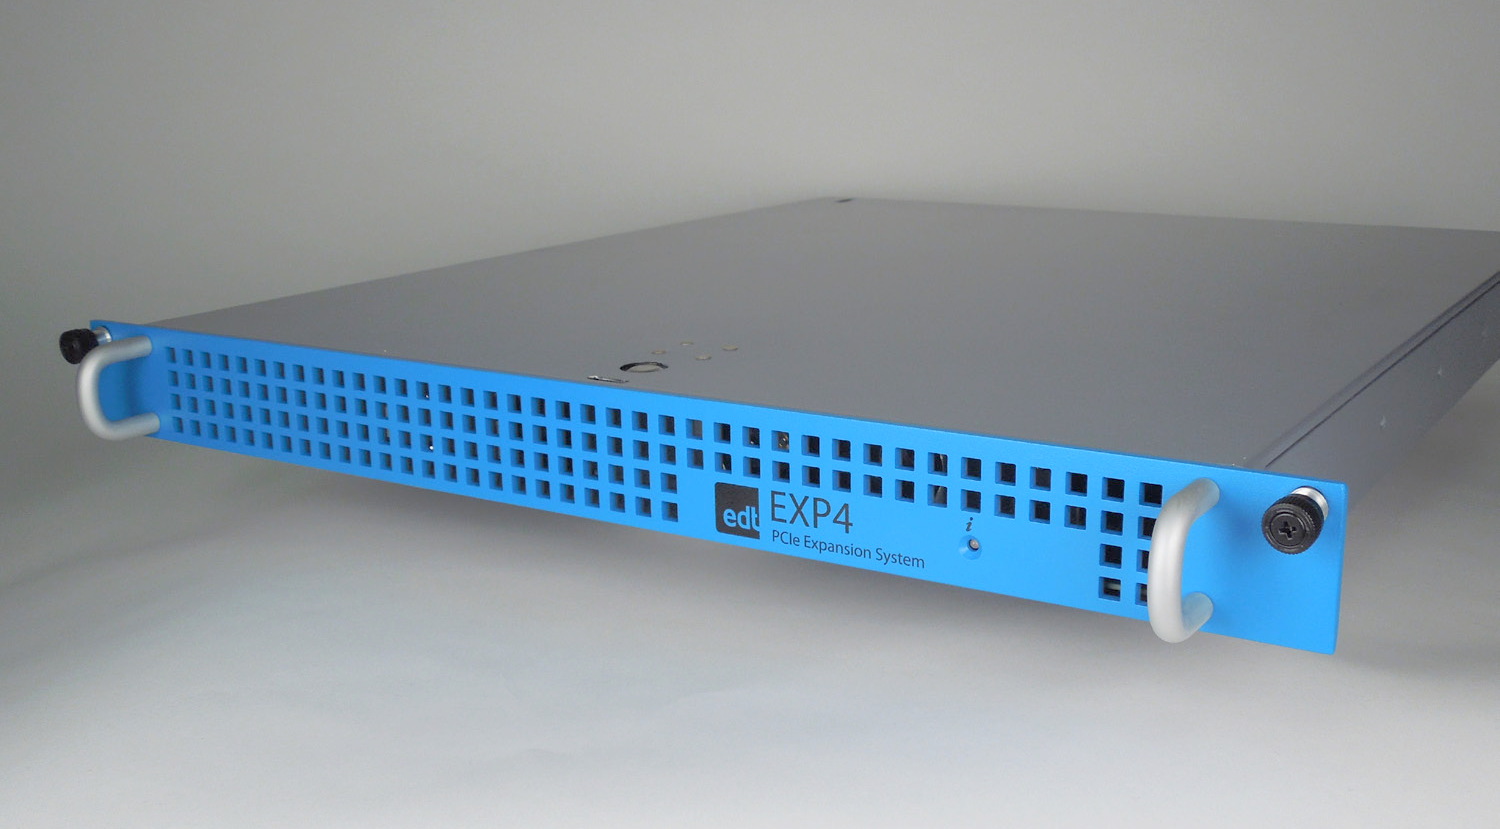 EDT EXP4 – 1U expansion system for PCIe2 x8 – Sky Blue Microsystems GmbH